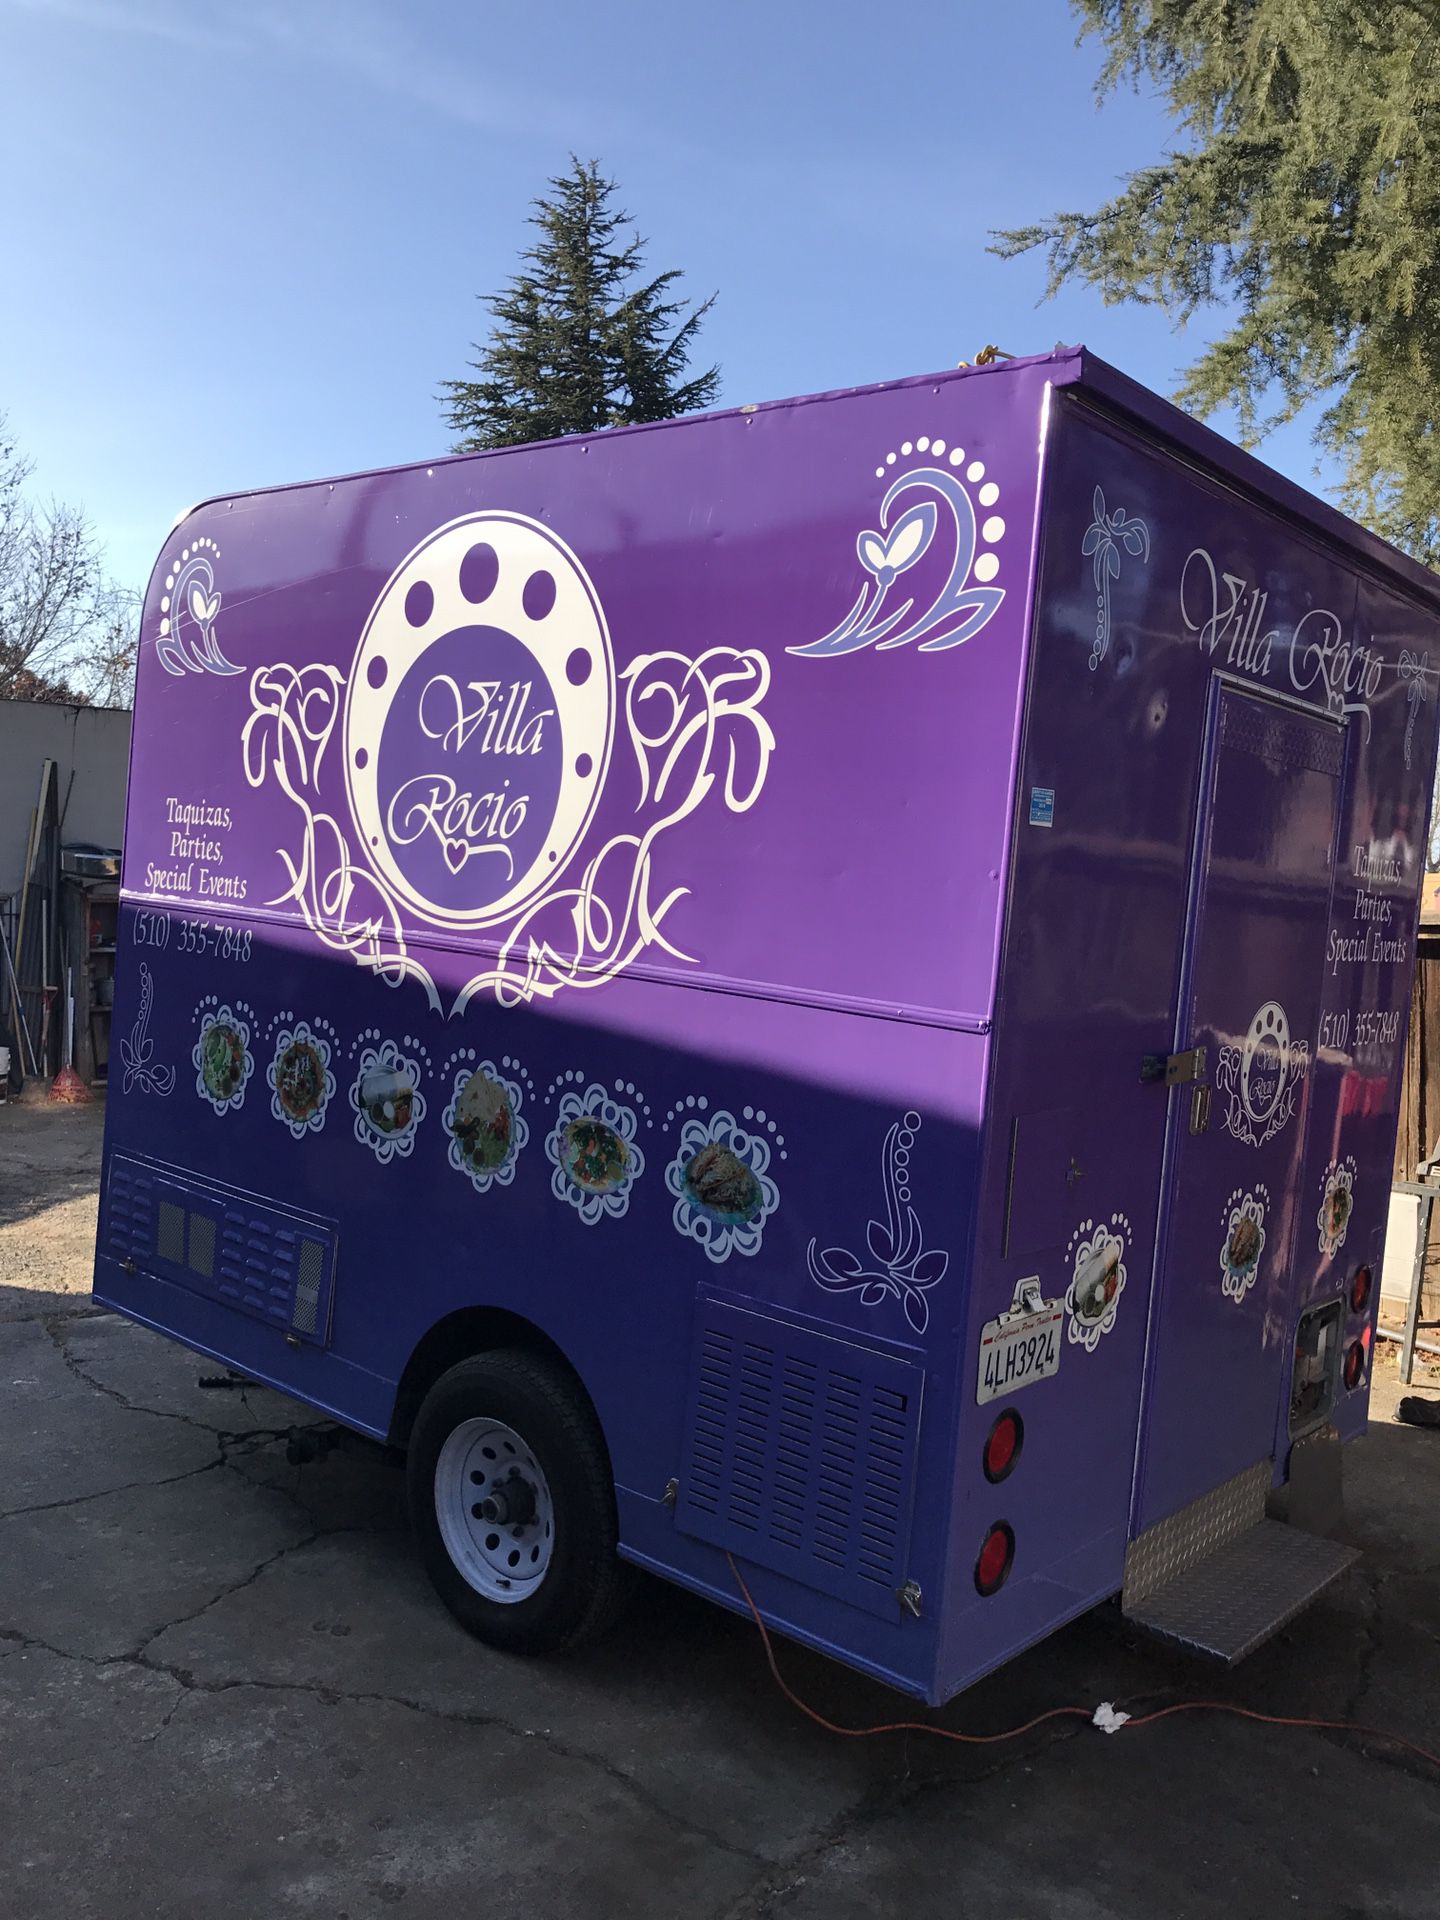 Hi we reporting my catering trailer stolen Monday -27 -219 from may house 326 MacArthur San Leandro ca if u see col the police or col me Gabriel (510